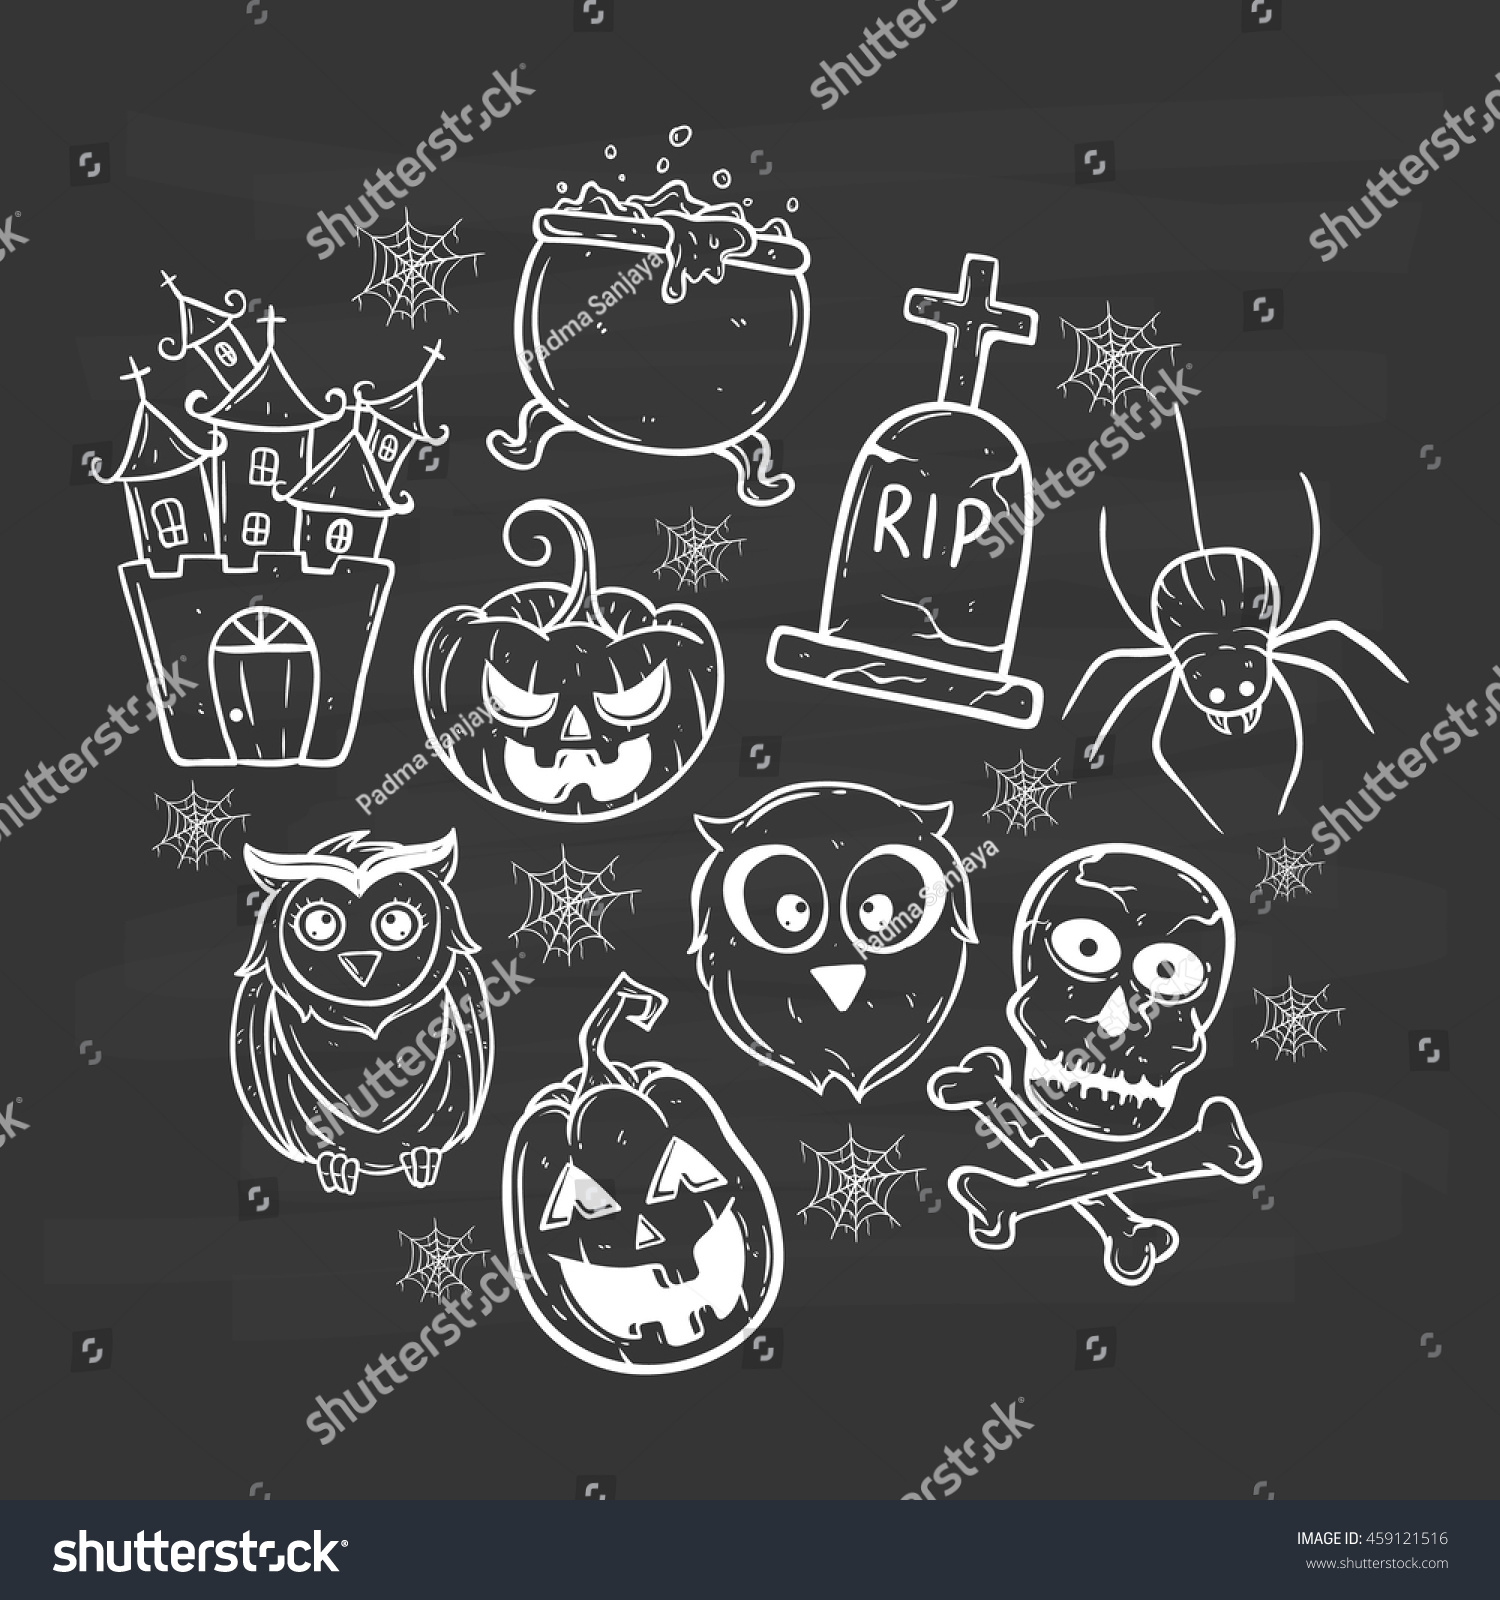 Halloween Icons Set Using Doodle Art Stock Vector Royalty Free